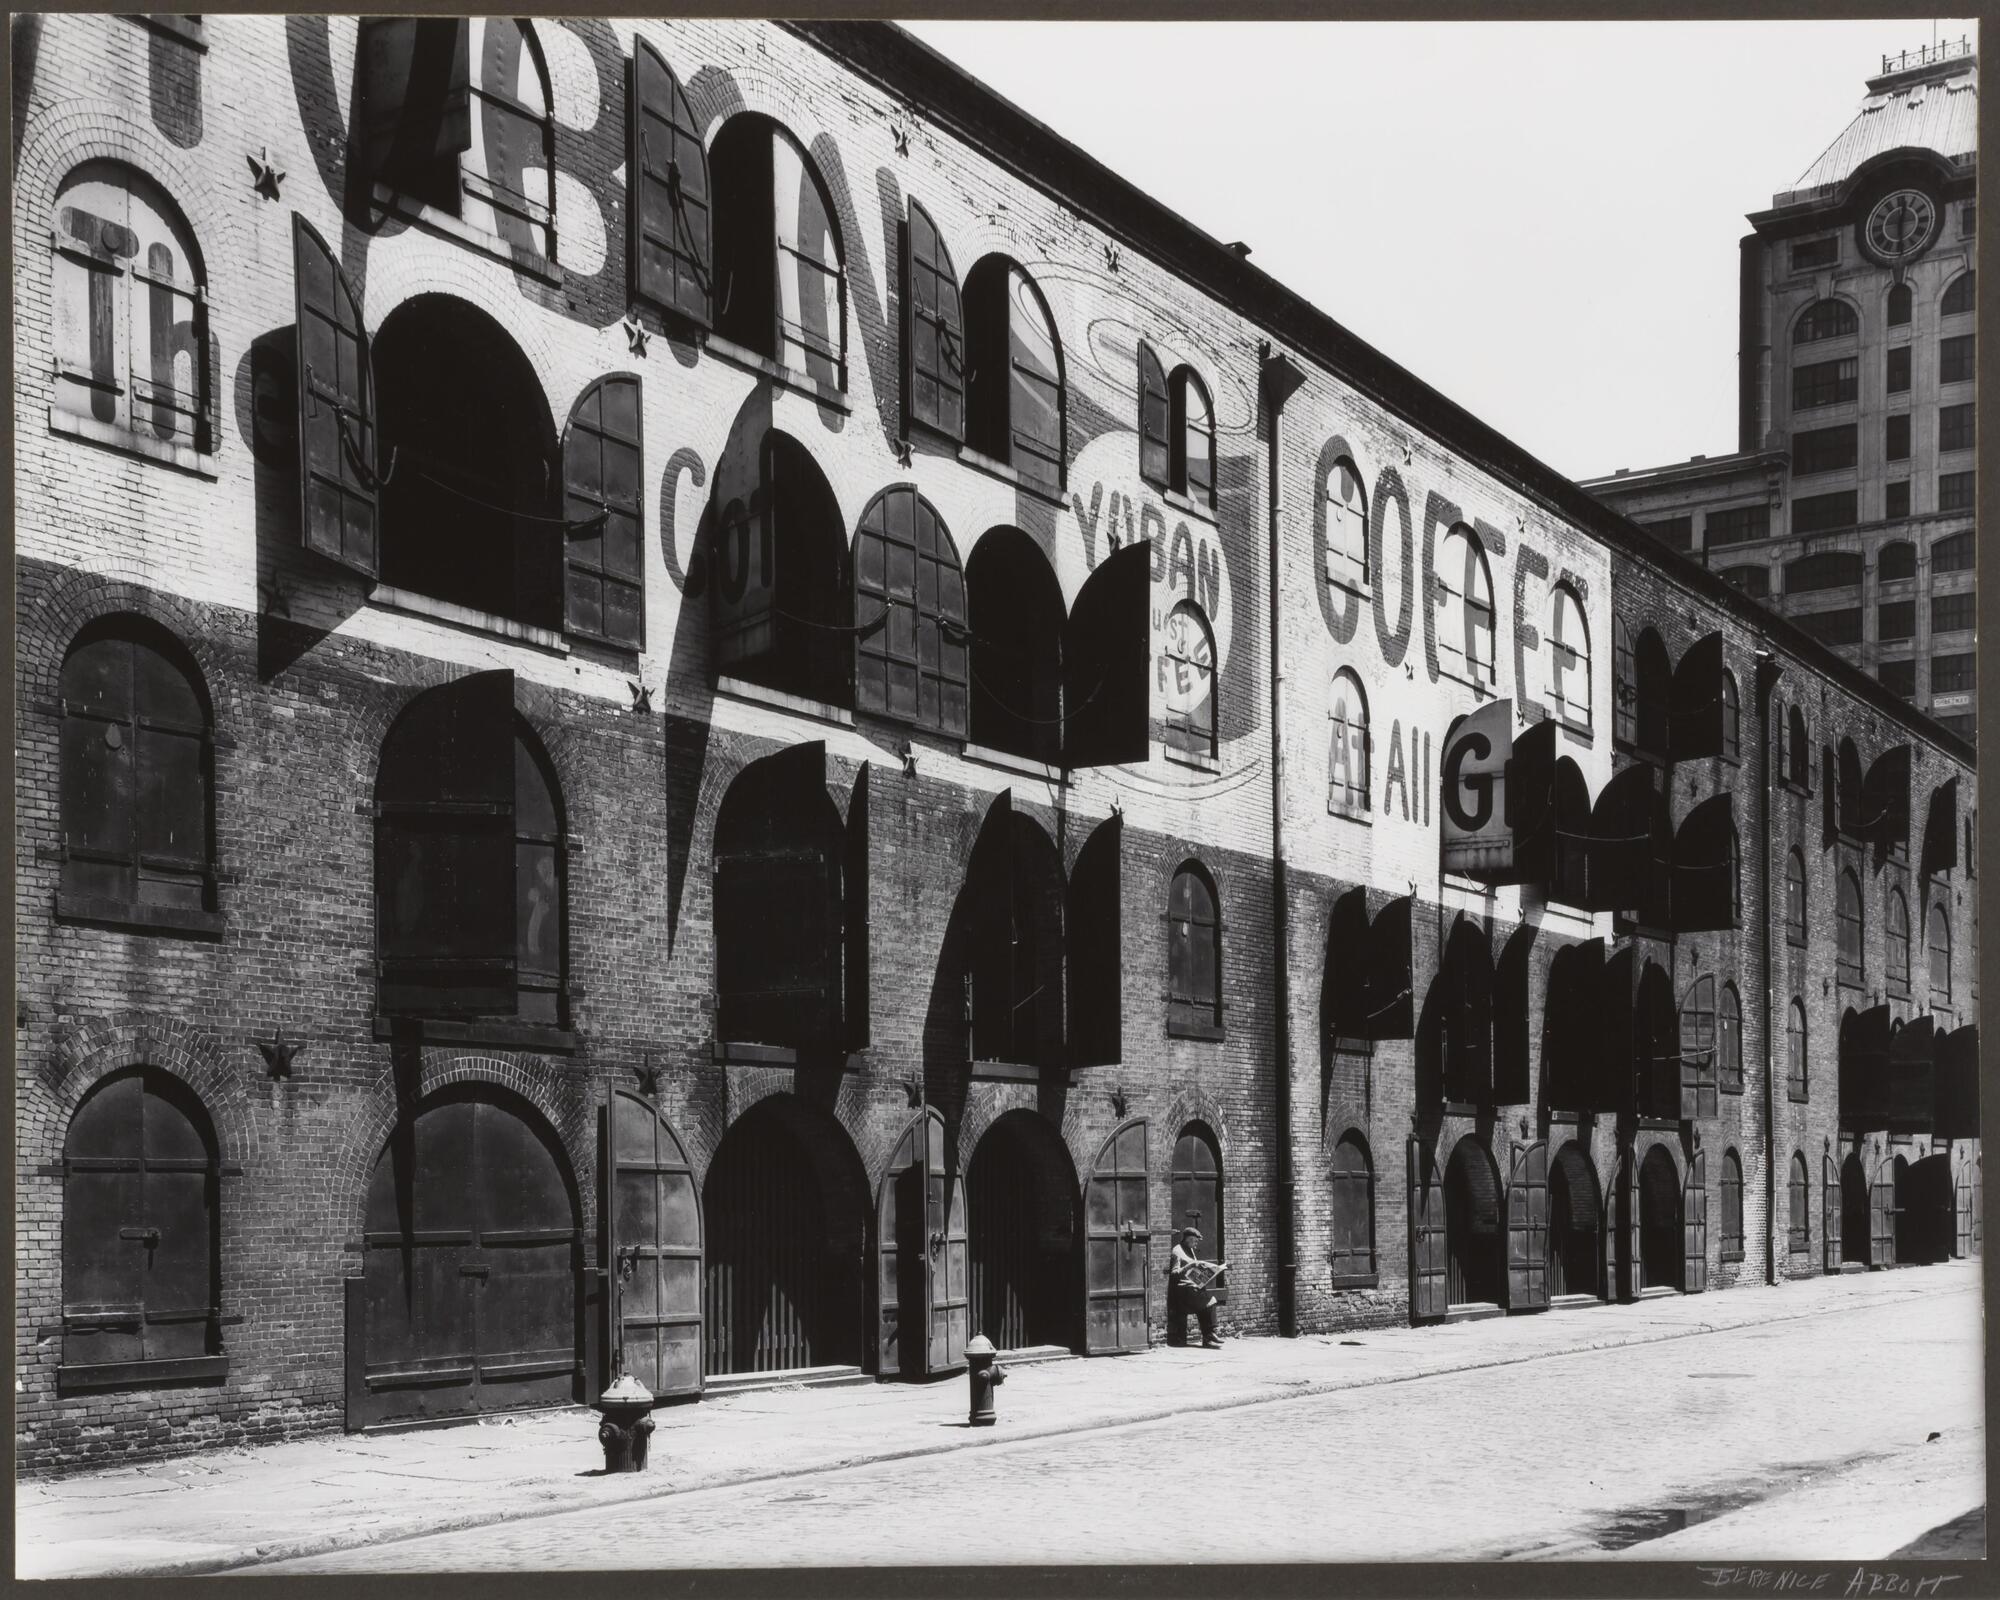 Oblique view of a warehouse building with open shutters.